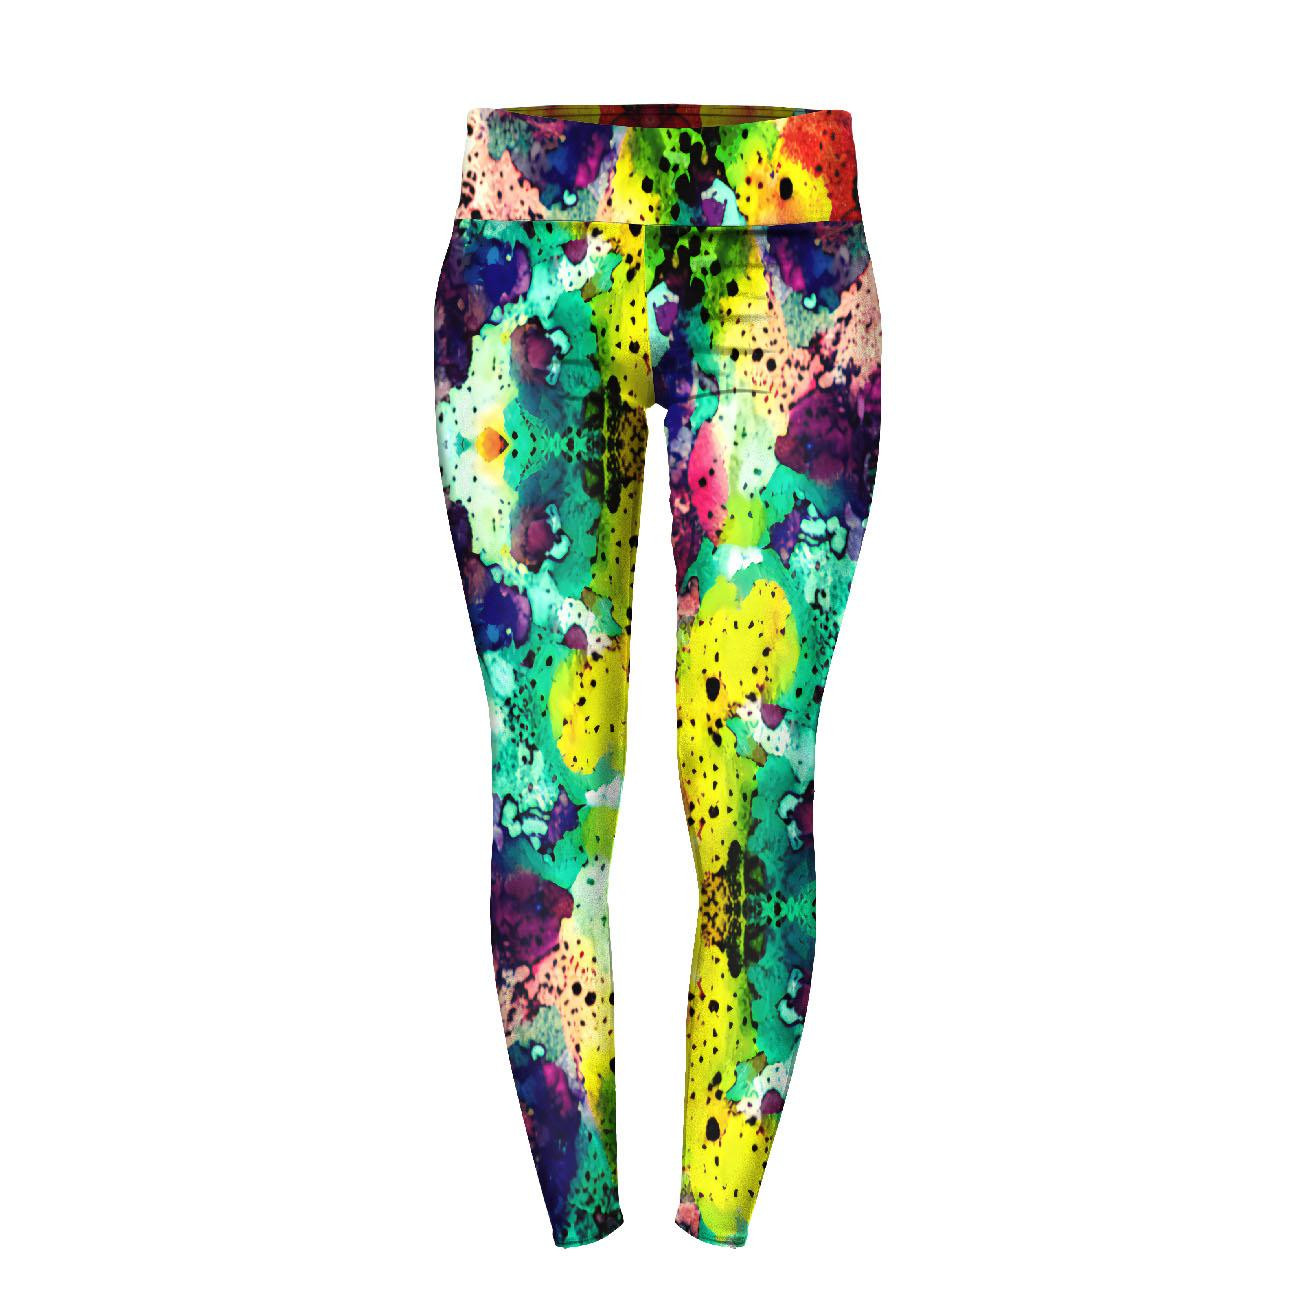 SPORTS LEGGINGS - ABSTRACTION pat. 9 - sewing set